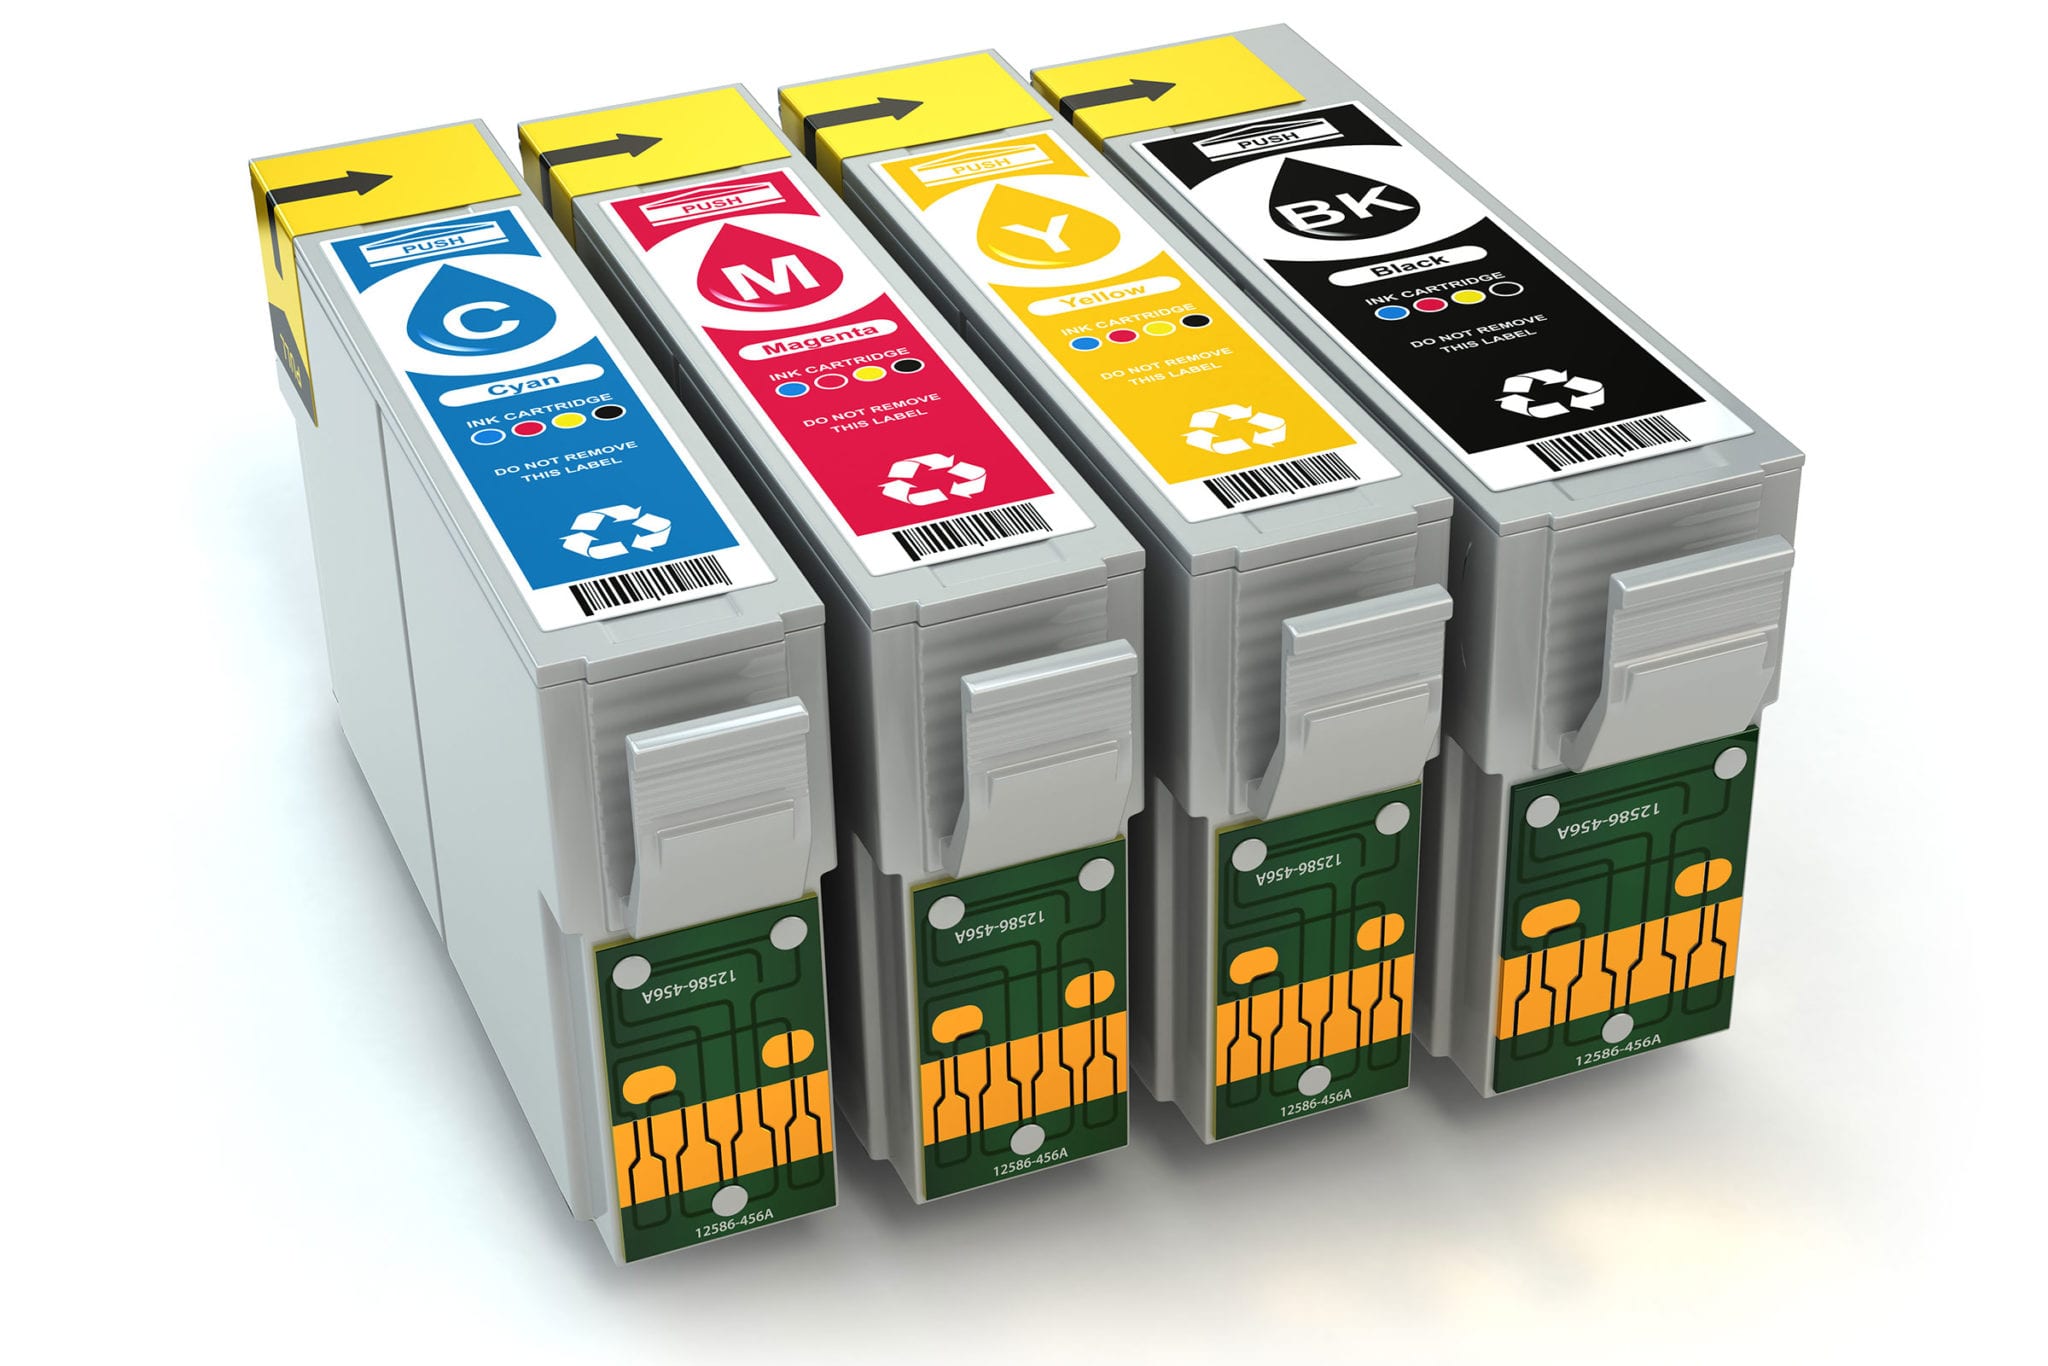 Learn More About Printer Toner Cartridges